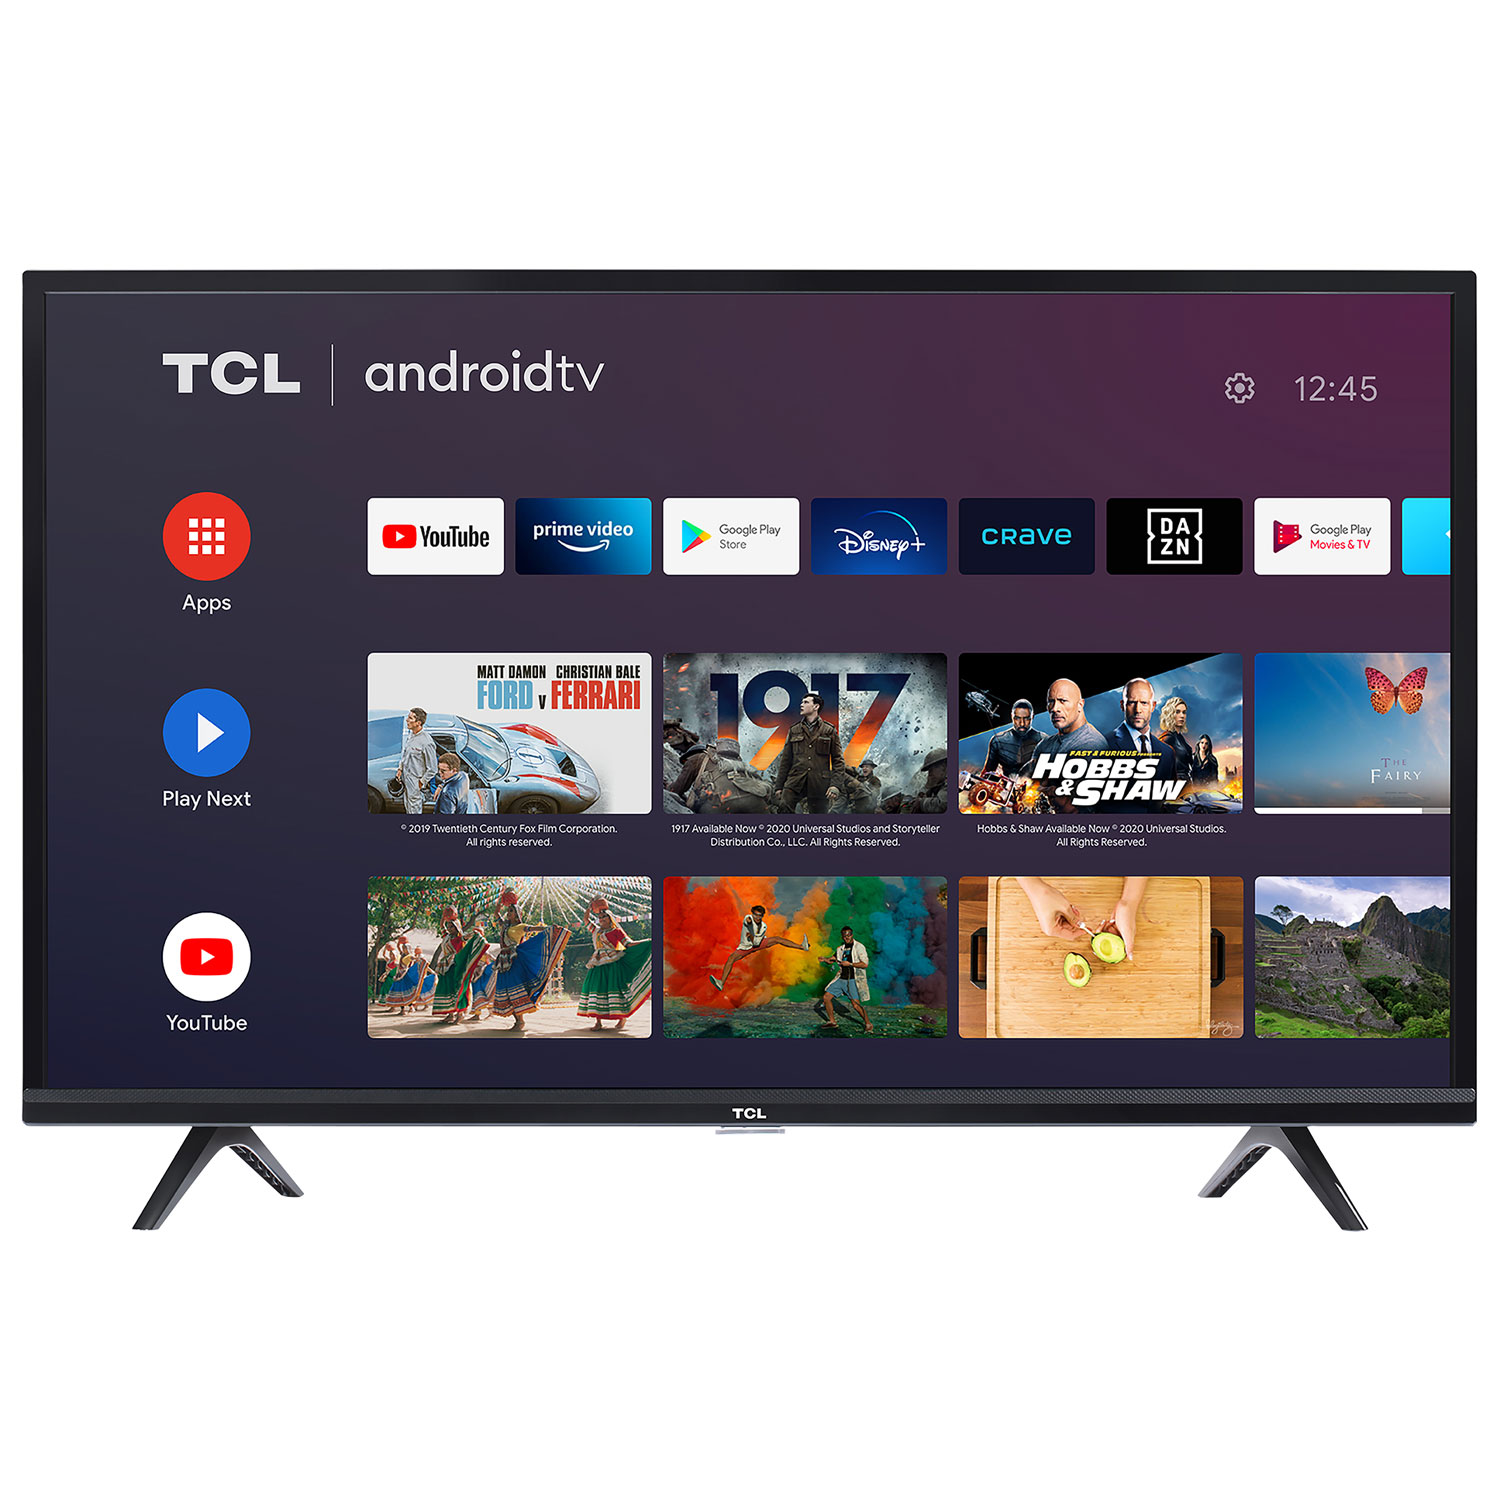 TCL 3-Series 32" 720p HD LED Android Smart TV (32S334-CA) - 2021